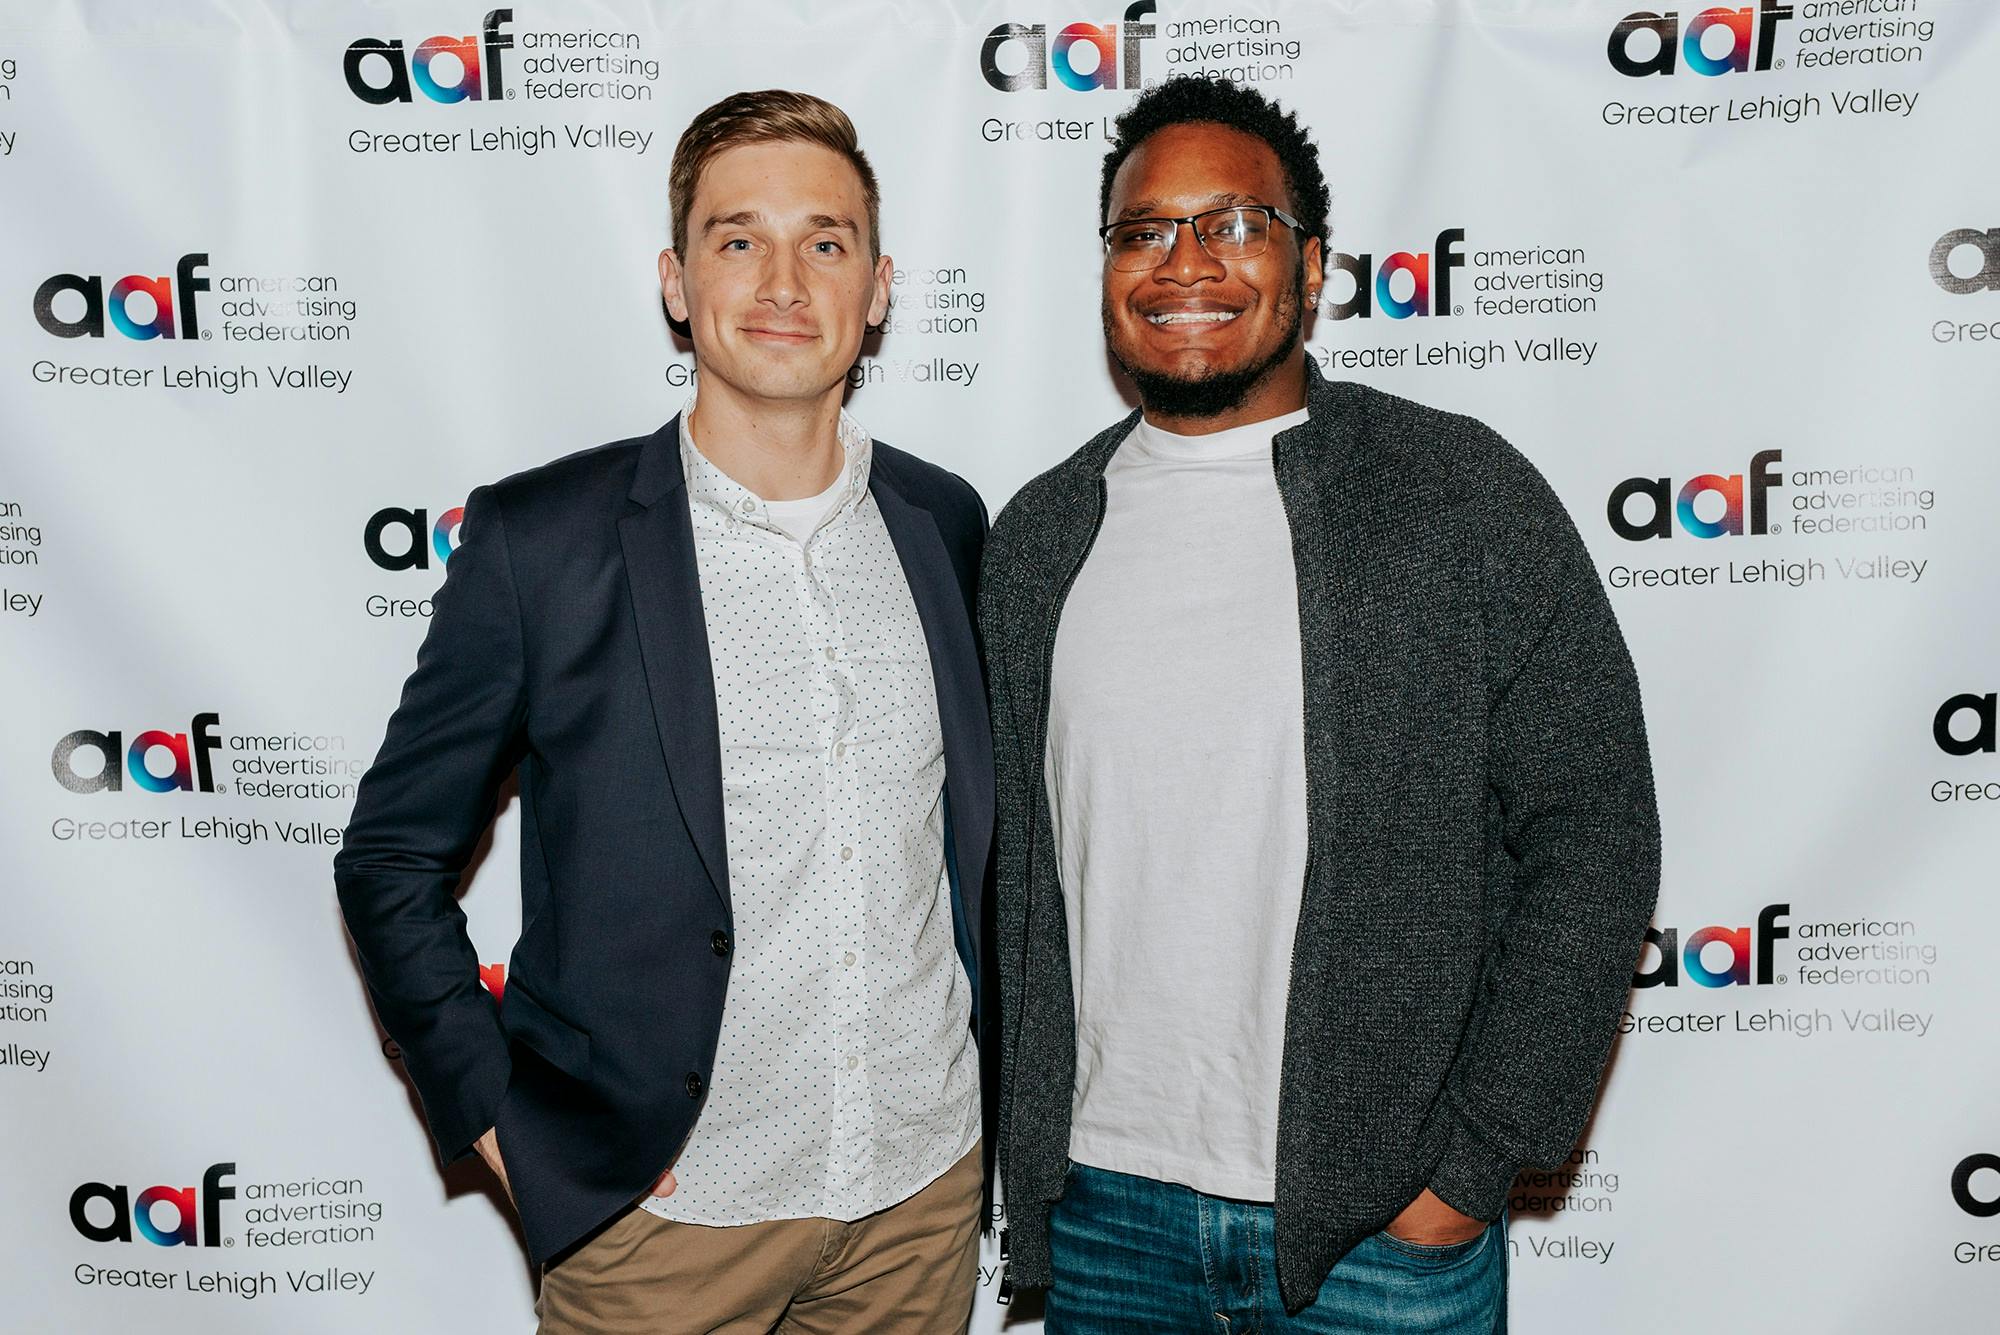 Jt and intern Cordell Corlette at the American Advertising Awards held at the Roxy Theatre in Northampton, PA